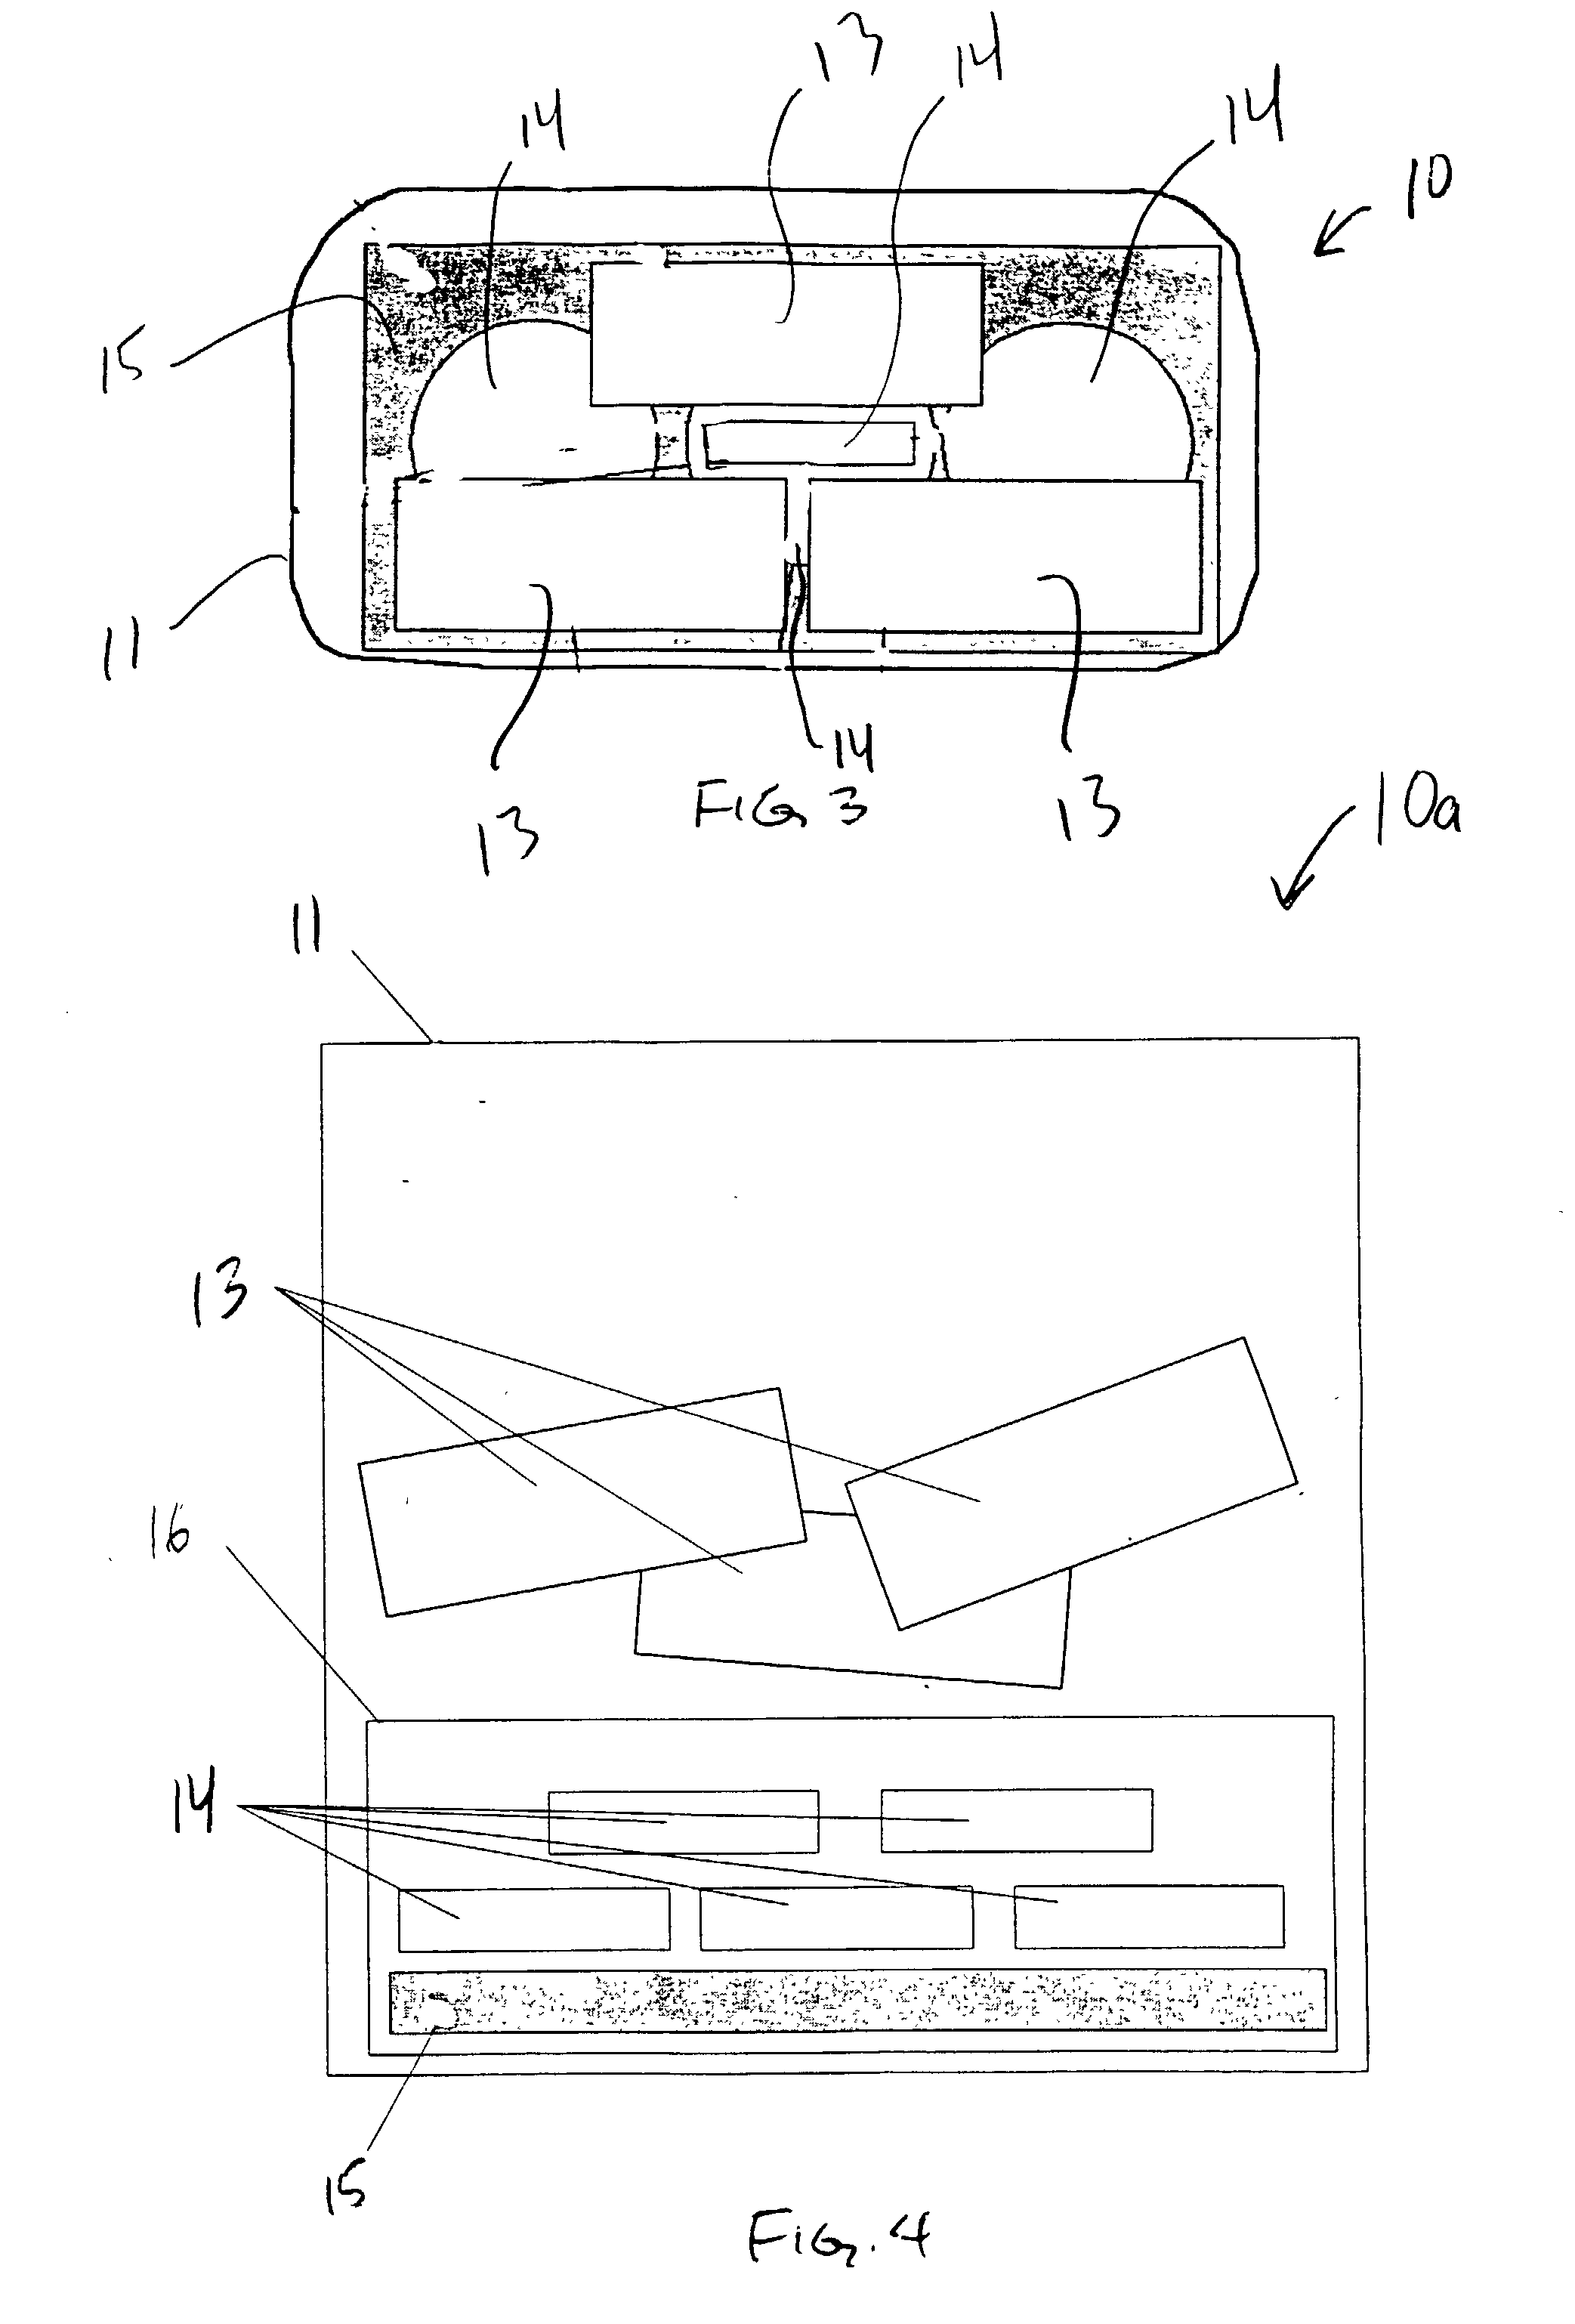 Combustible wood-based fuel package and method of manufacture thereof